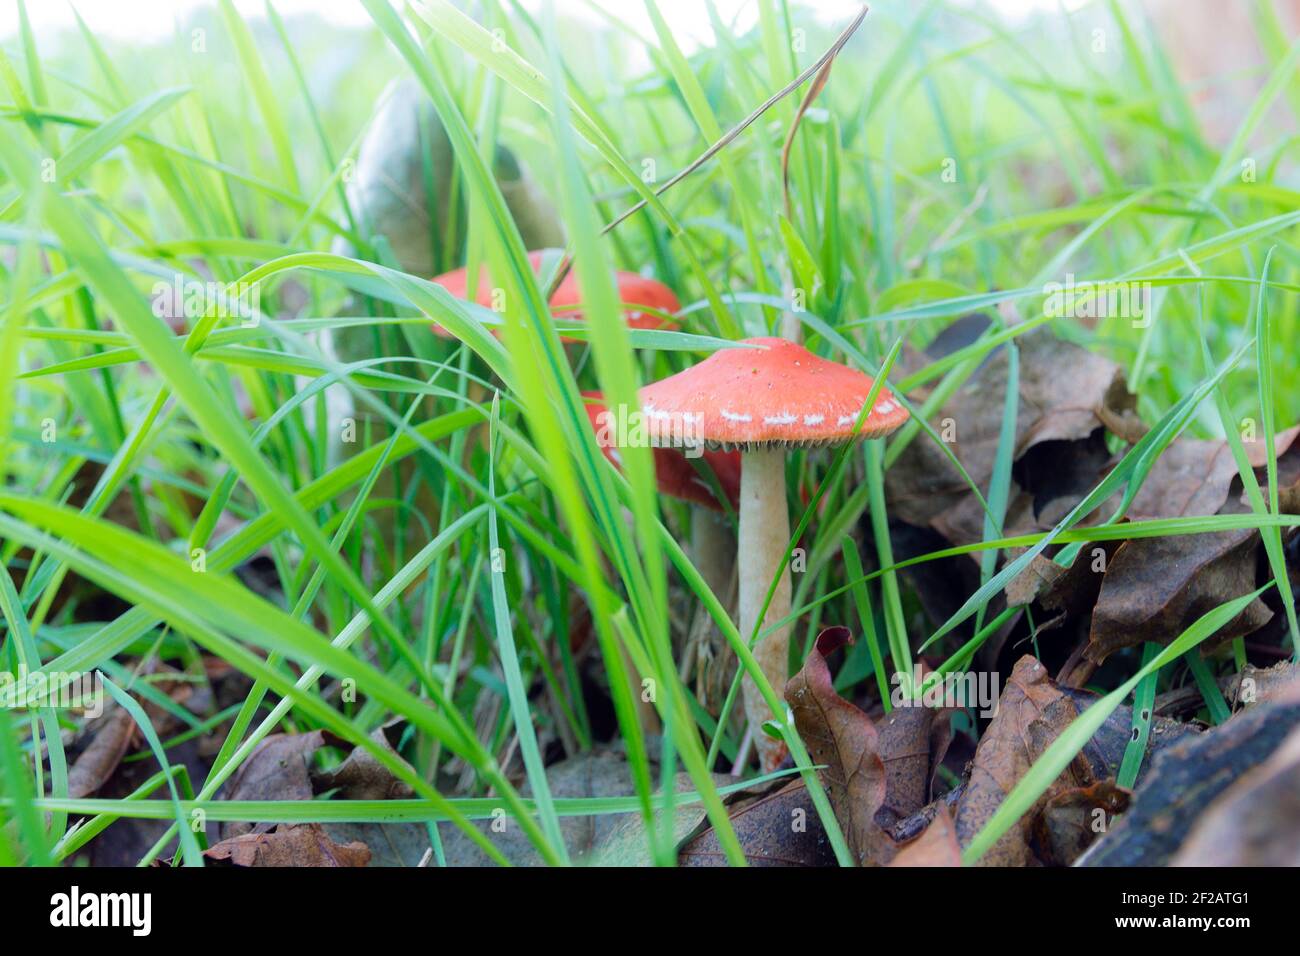 Small red capped toadstool hidden in the grass Stock Photo